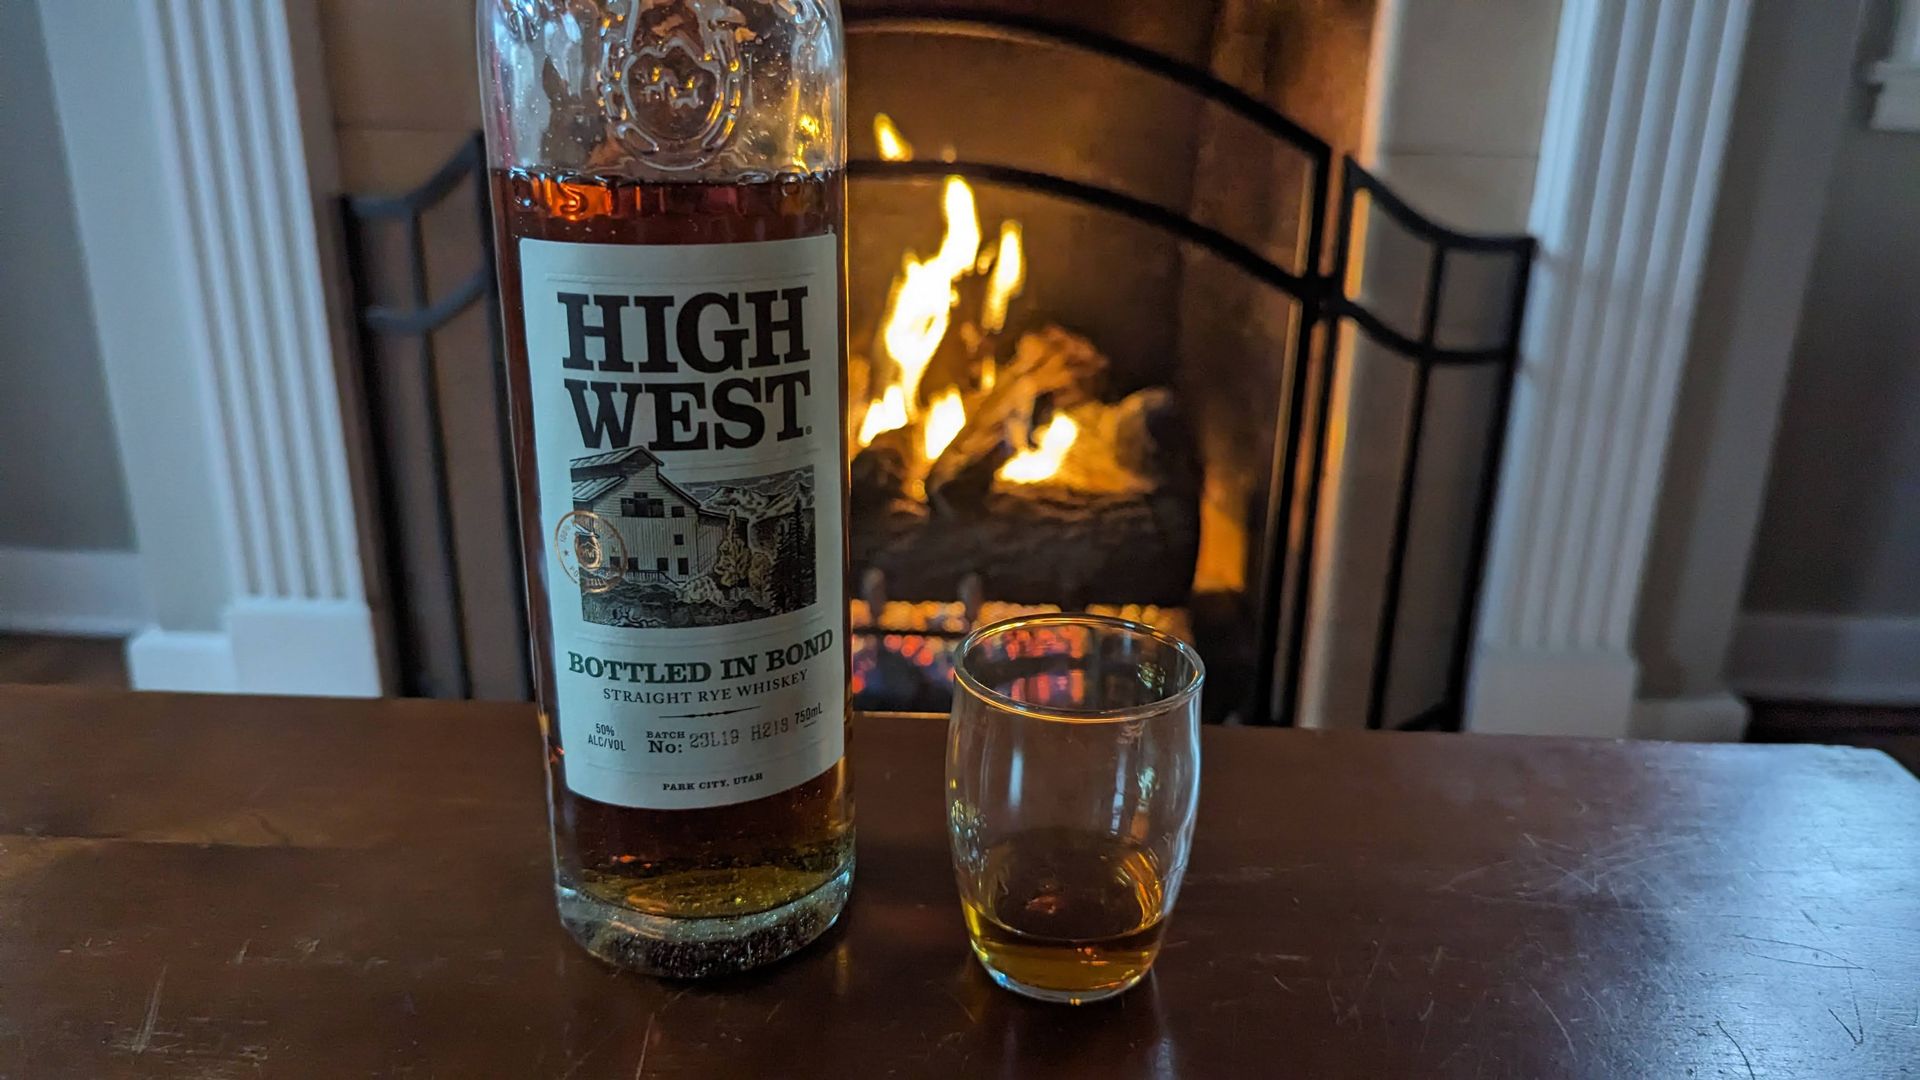 A bottle of High West Bottled in Bond rye whiskey next to a glass of whiskey in front of a fireplace.